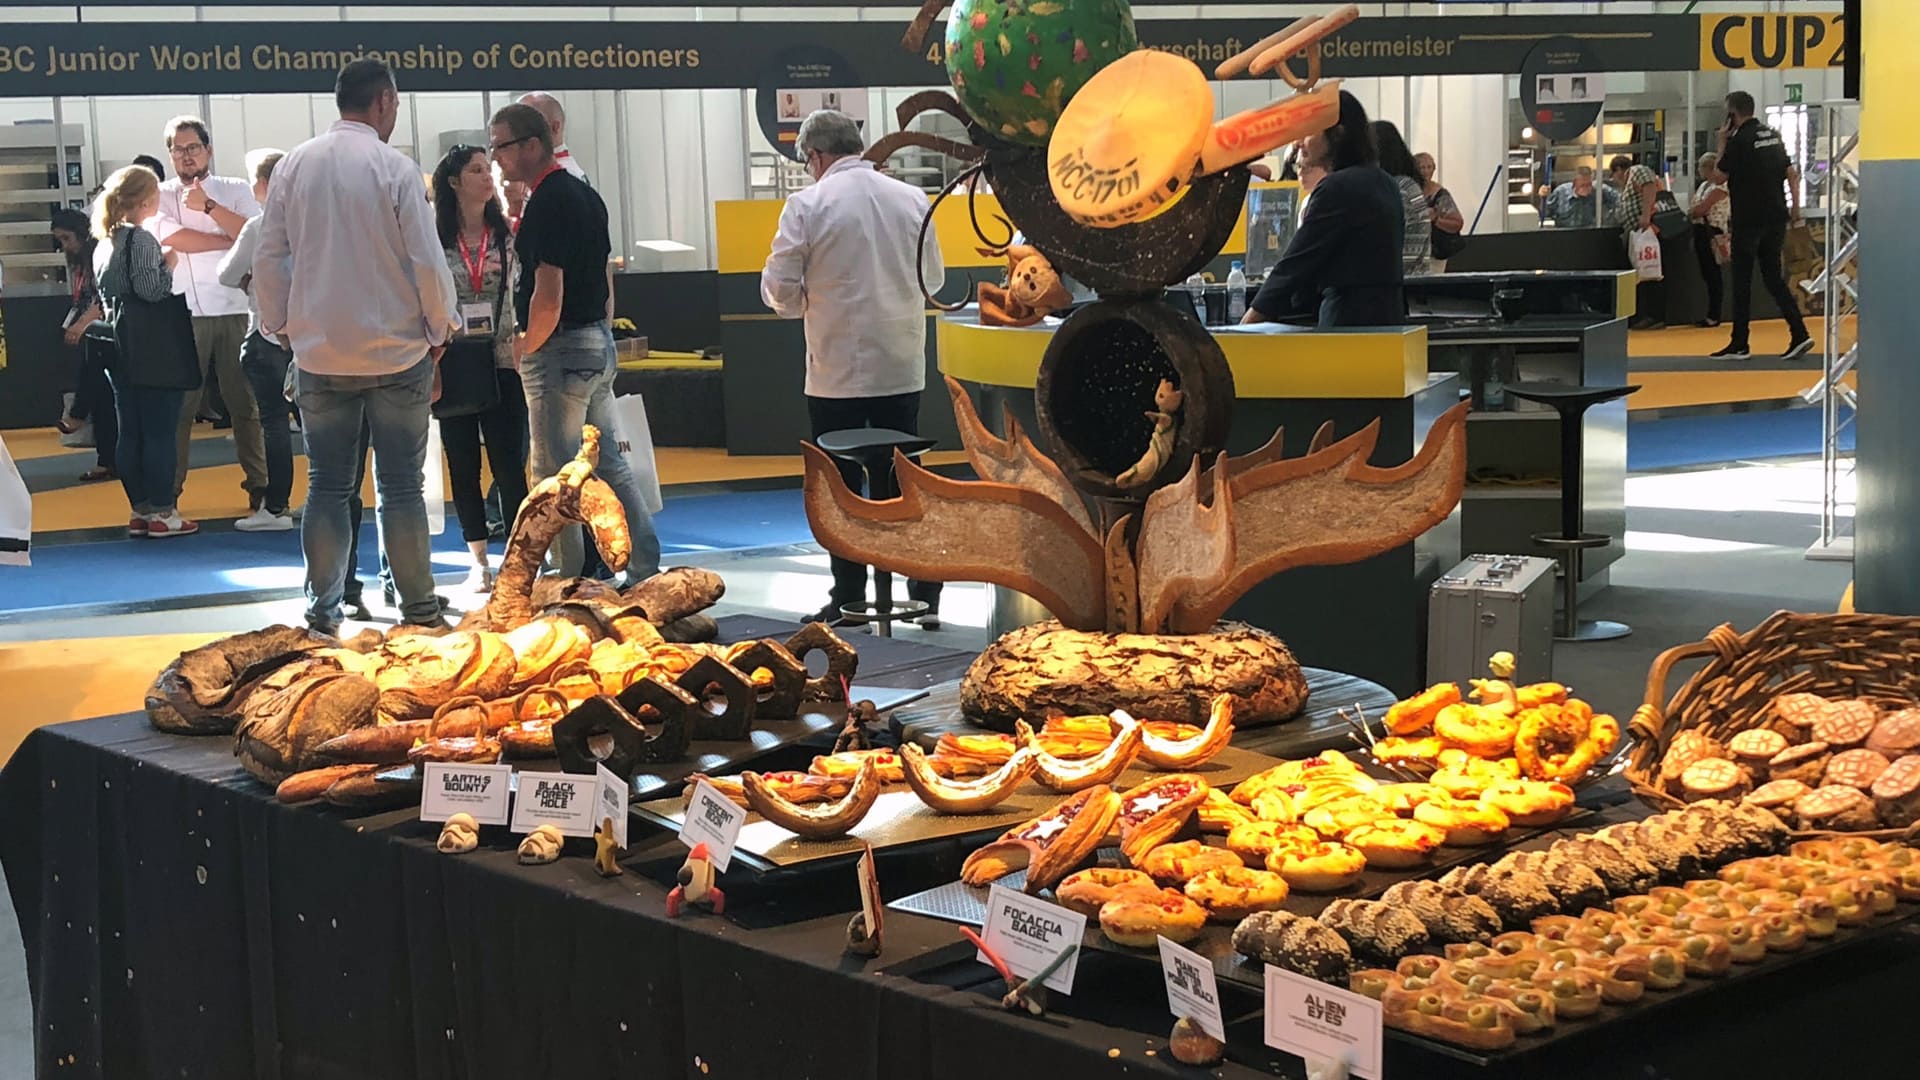 Bread and pastries at the IBA Cup.